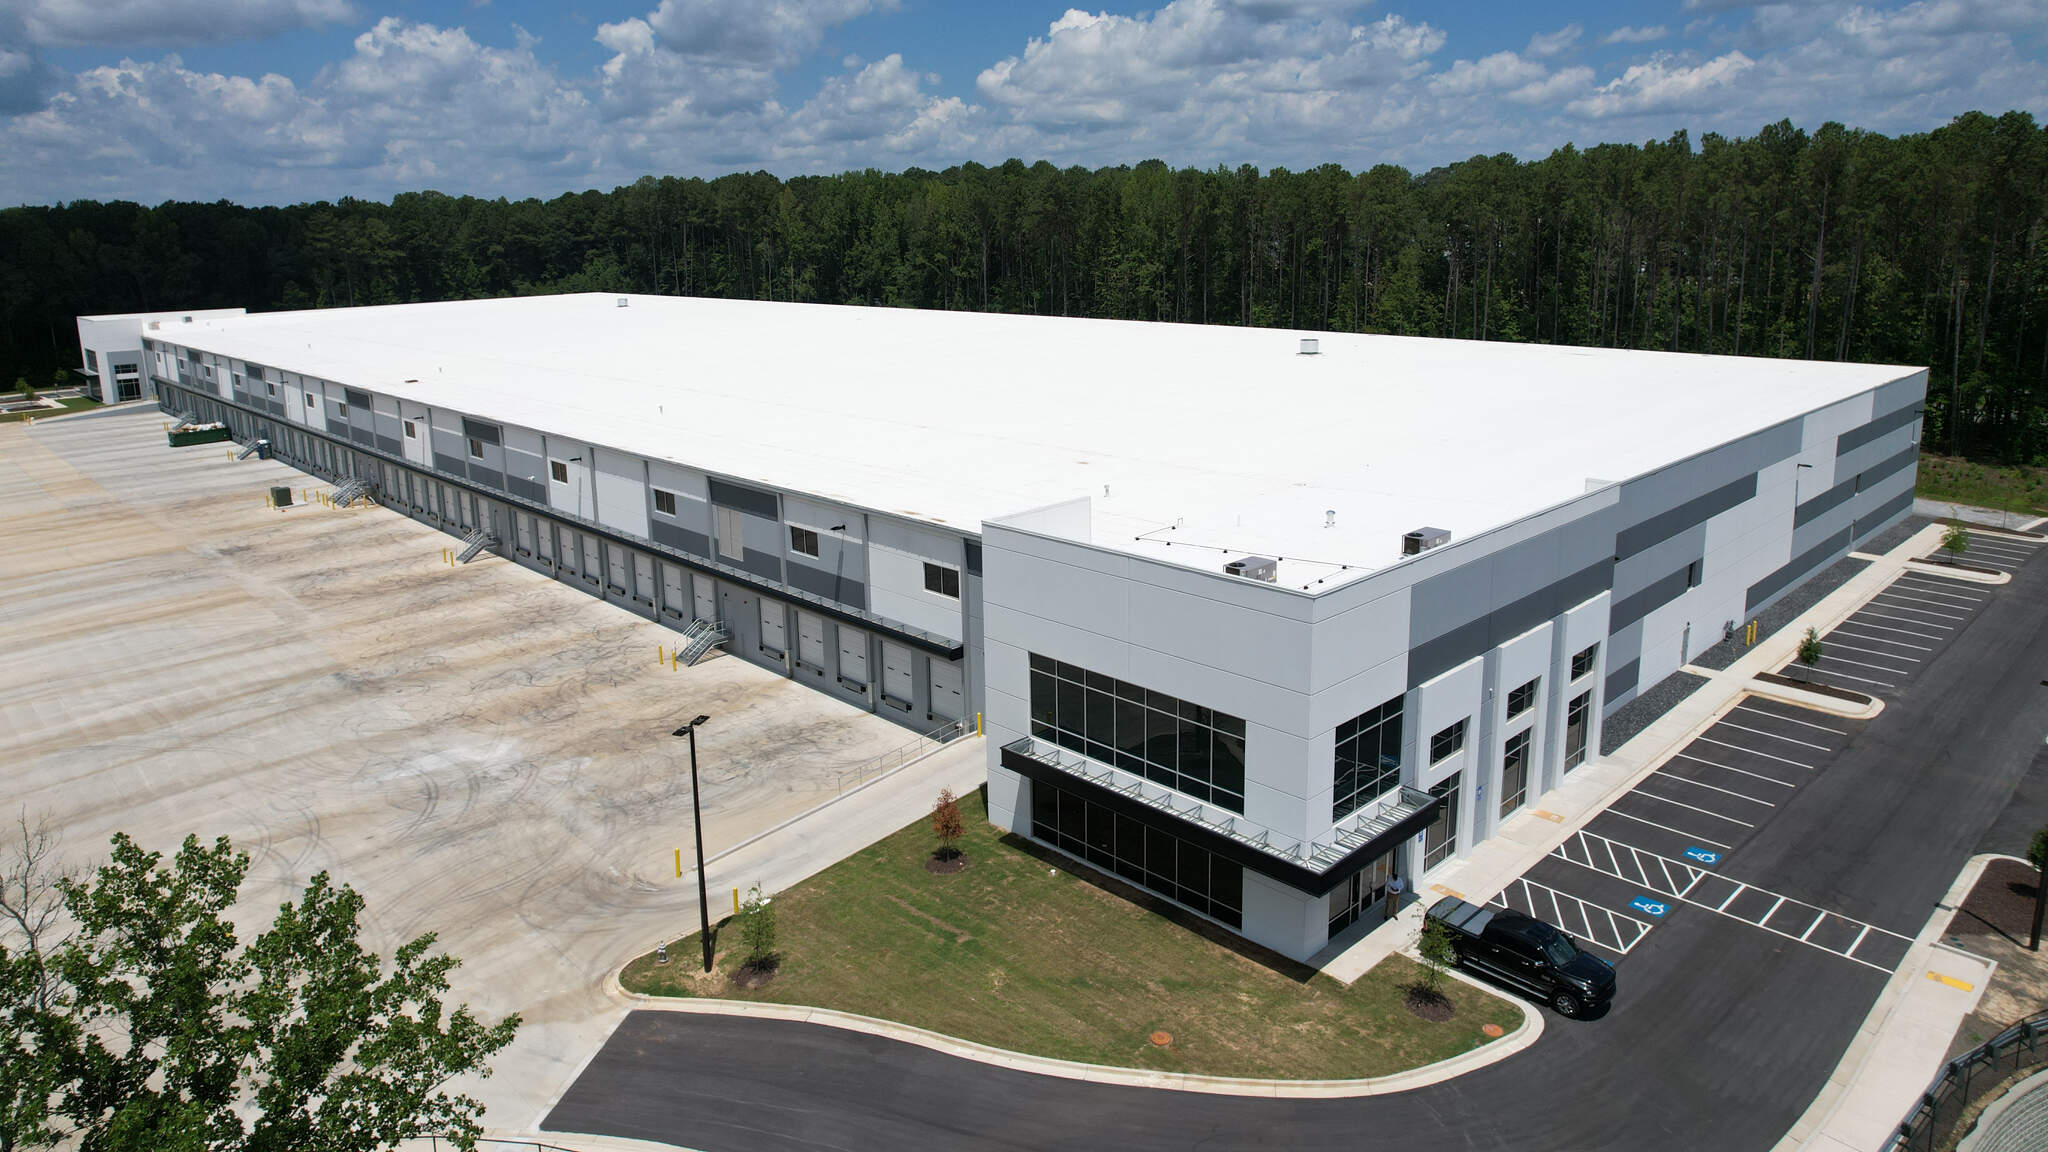 With the new facility, DACHSER USA has inaugurated its second warehouse in the Atlanta area and its fourth multi-user warehouse in the United States.